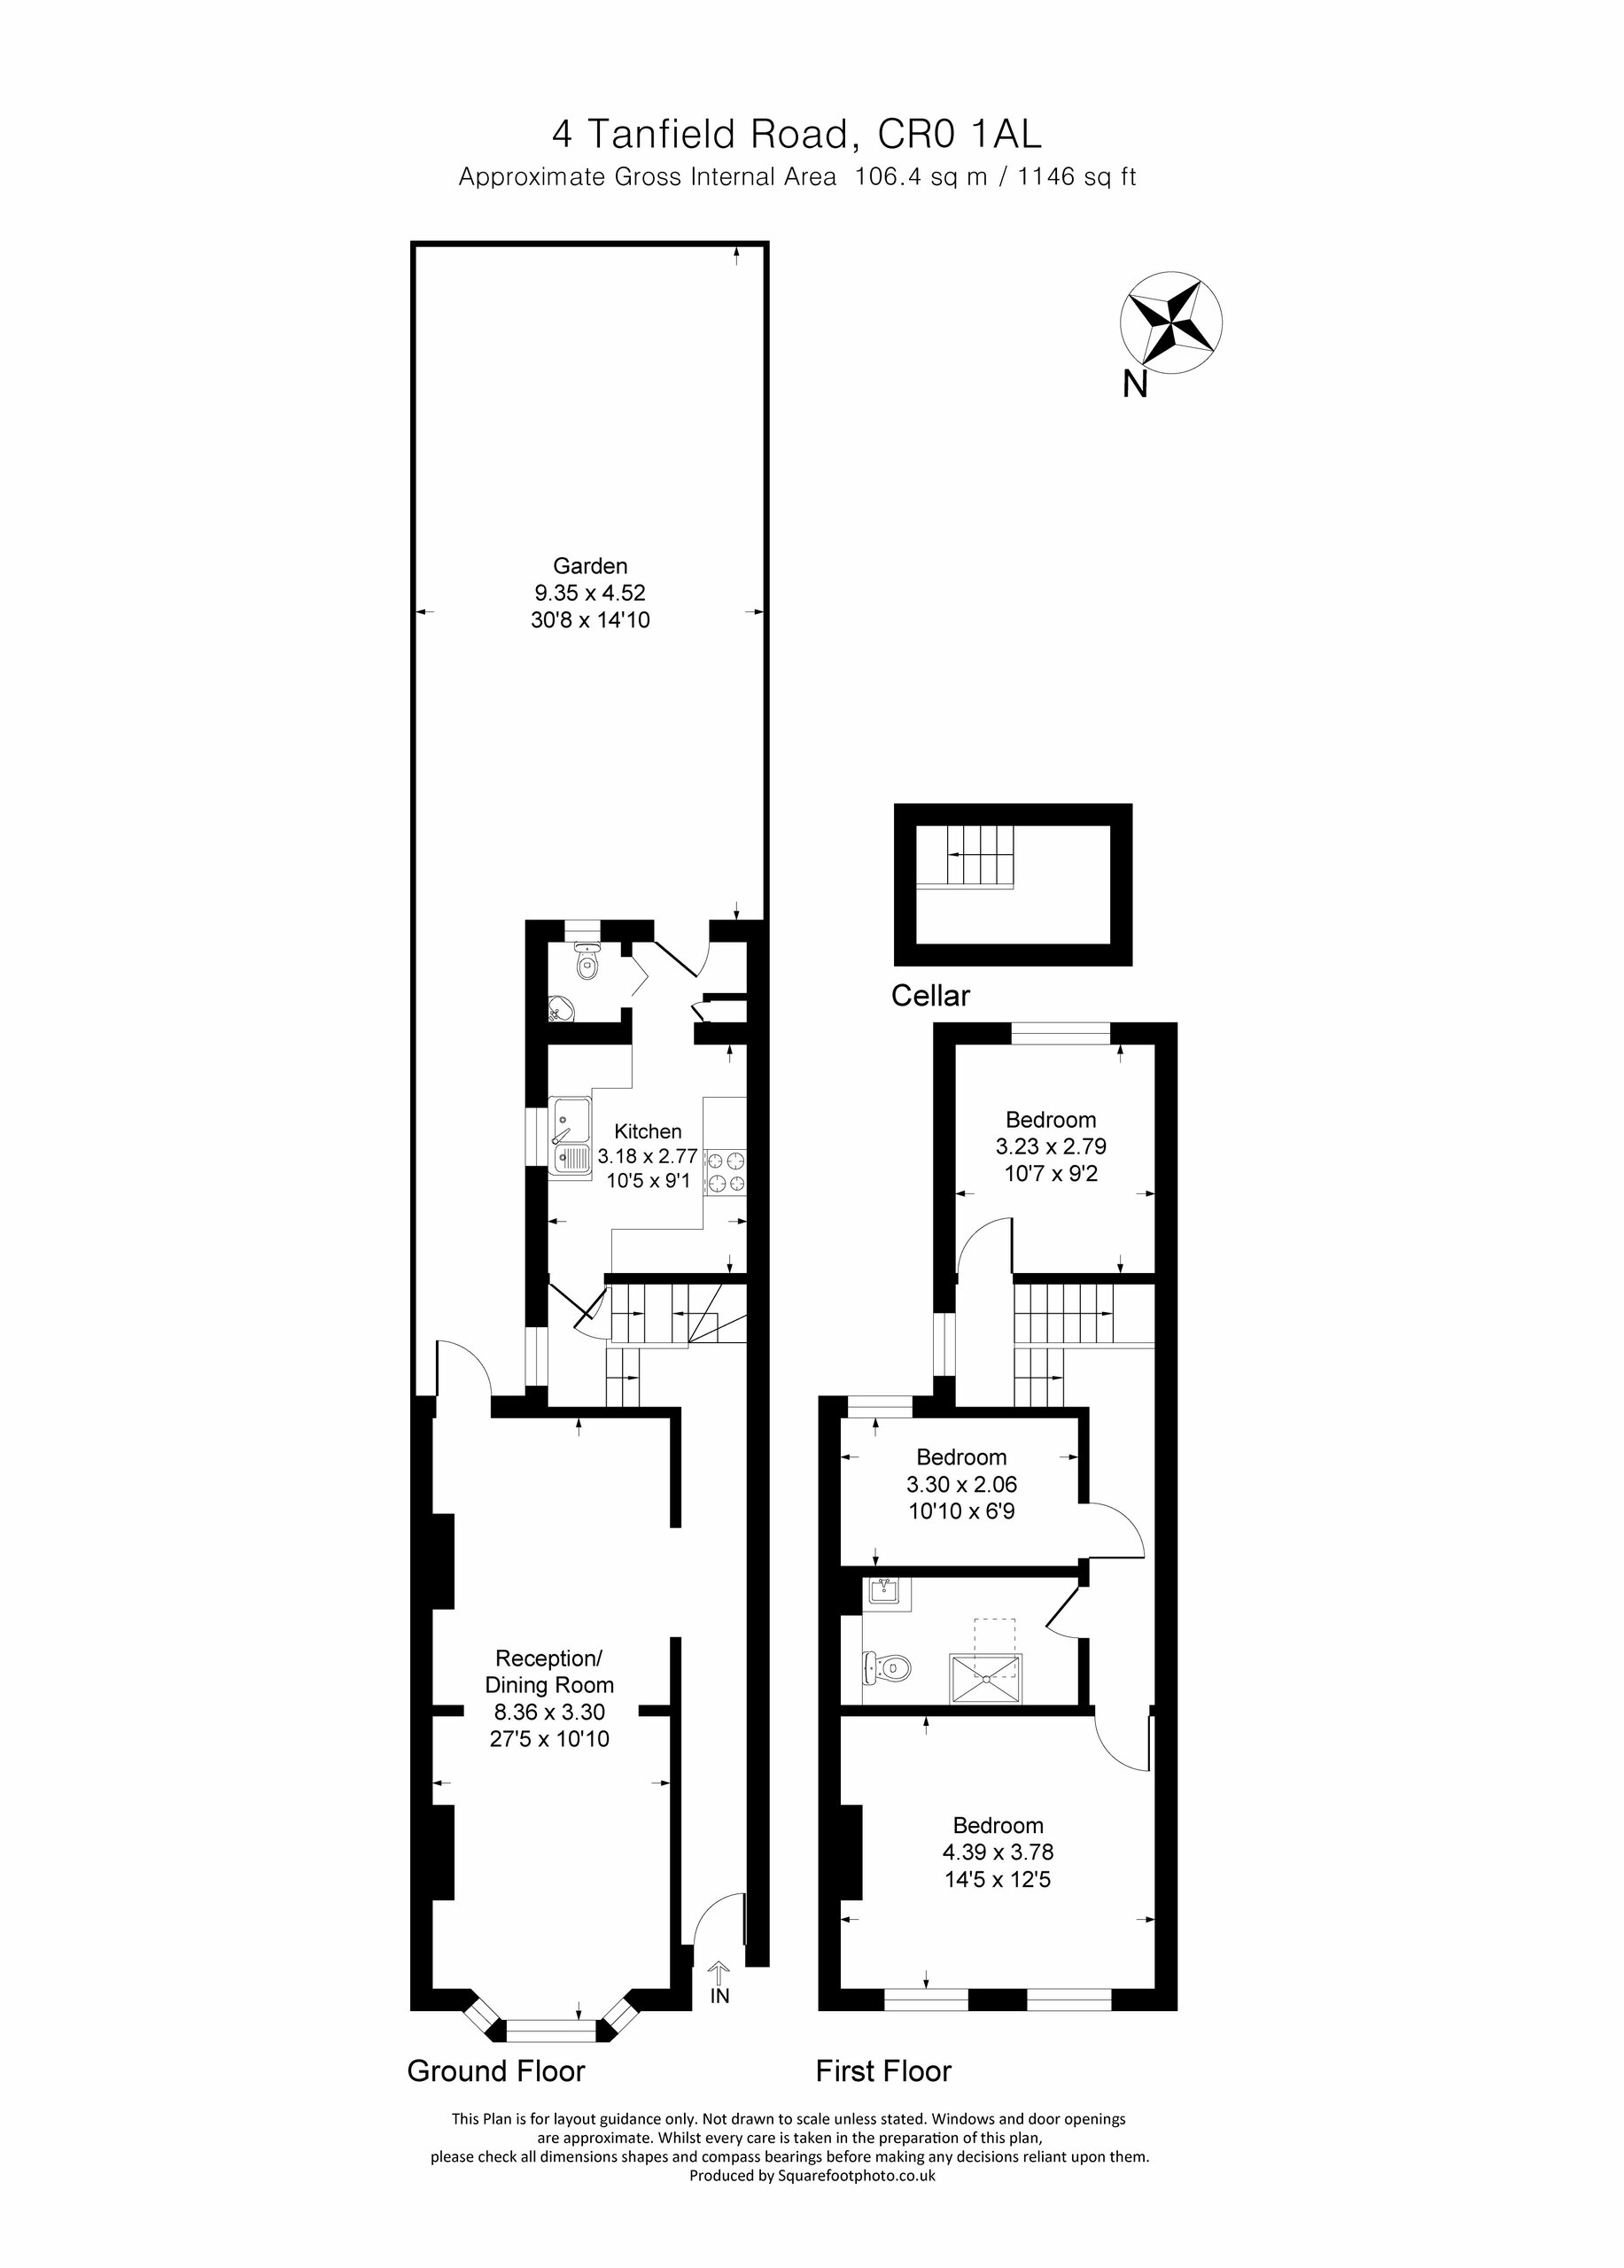 3 bed terraced house for sale in Tanfield Road, Croydon - Property floorplan